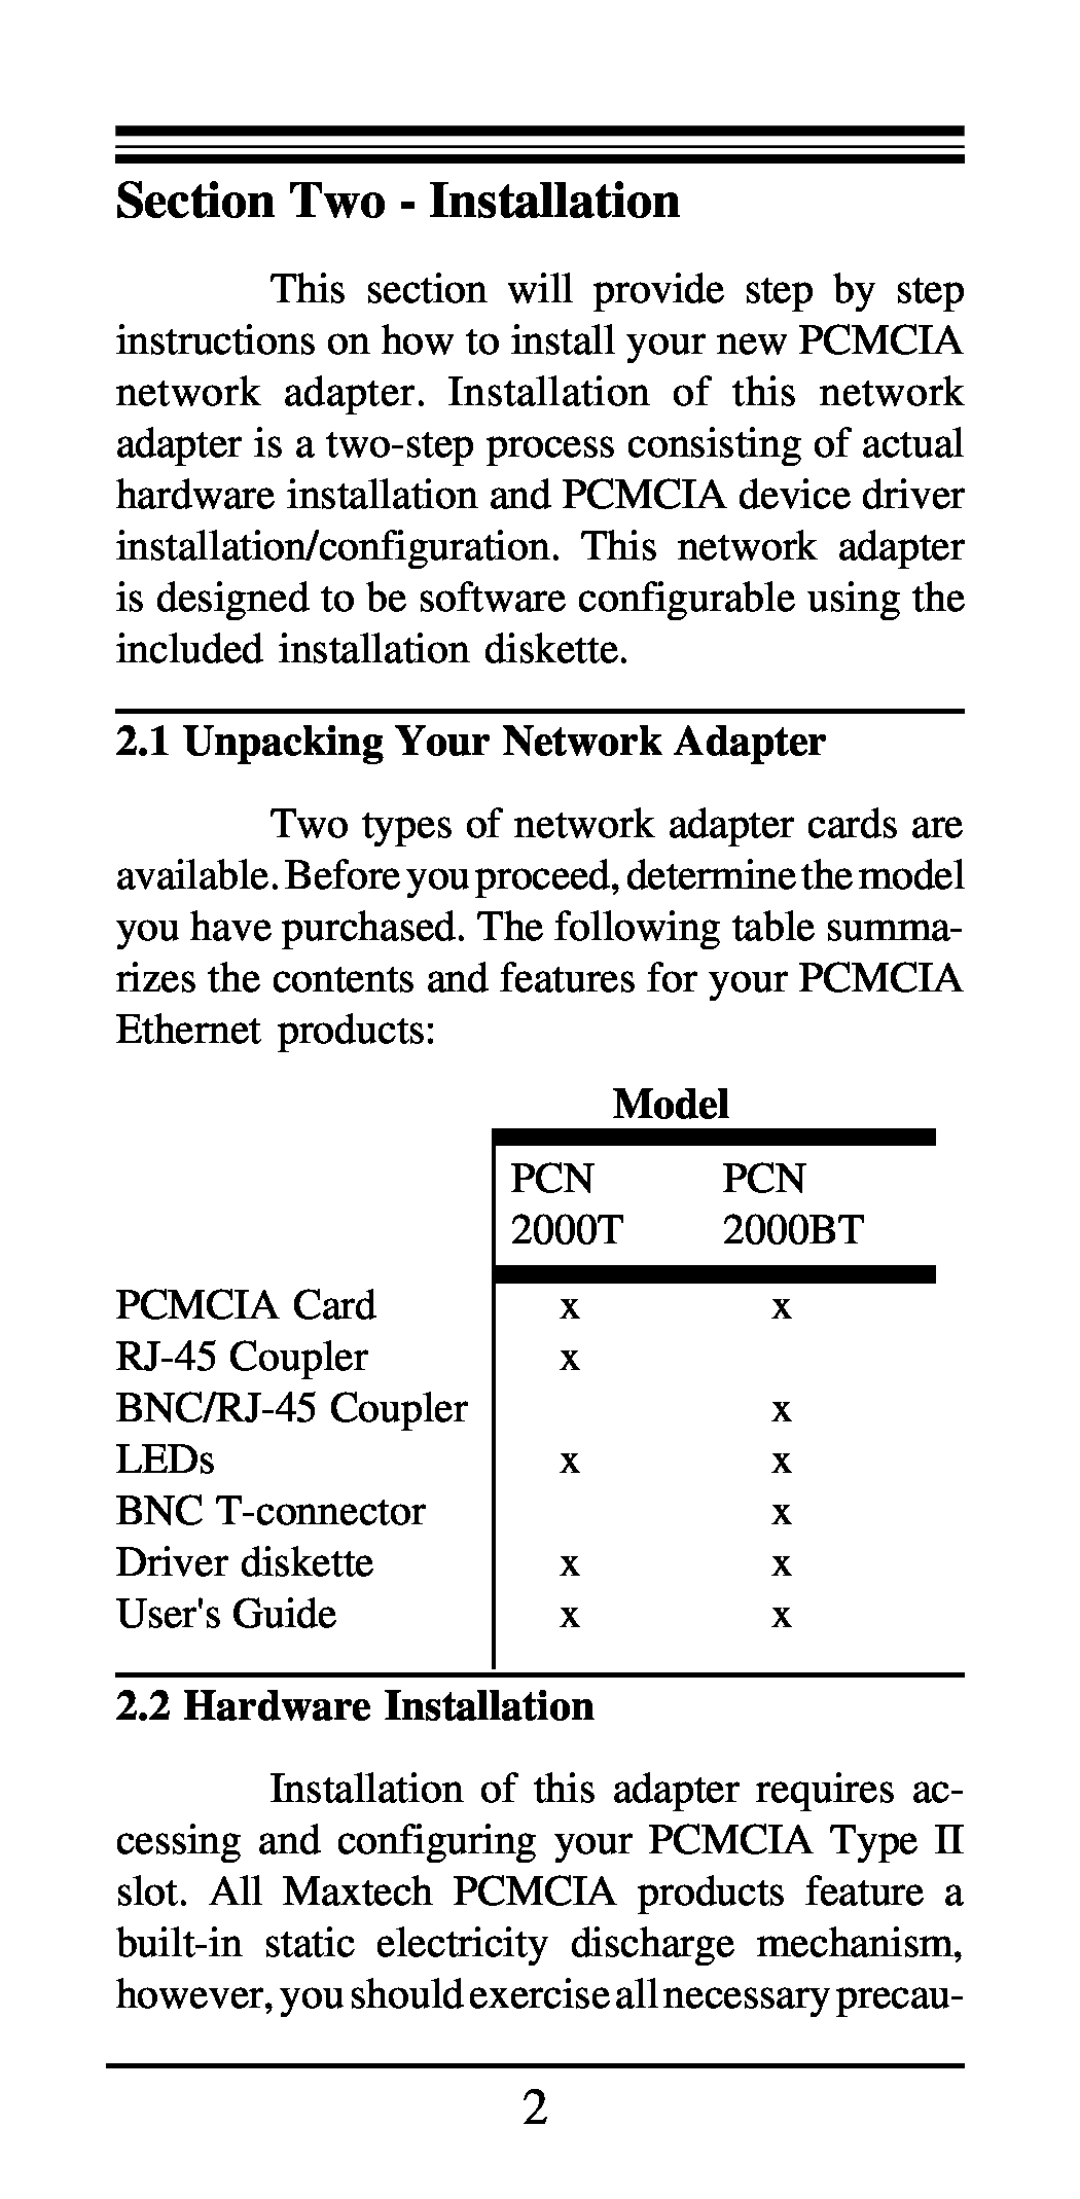 MaxTech PCN2000 Series manual Section Two - Installation, Unpacking Your Network Adapter, Model, Hardware Installation 